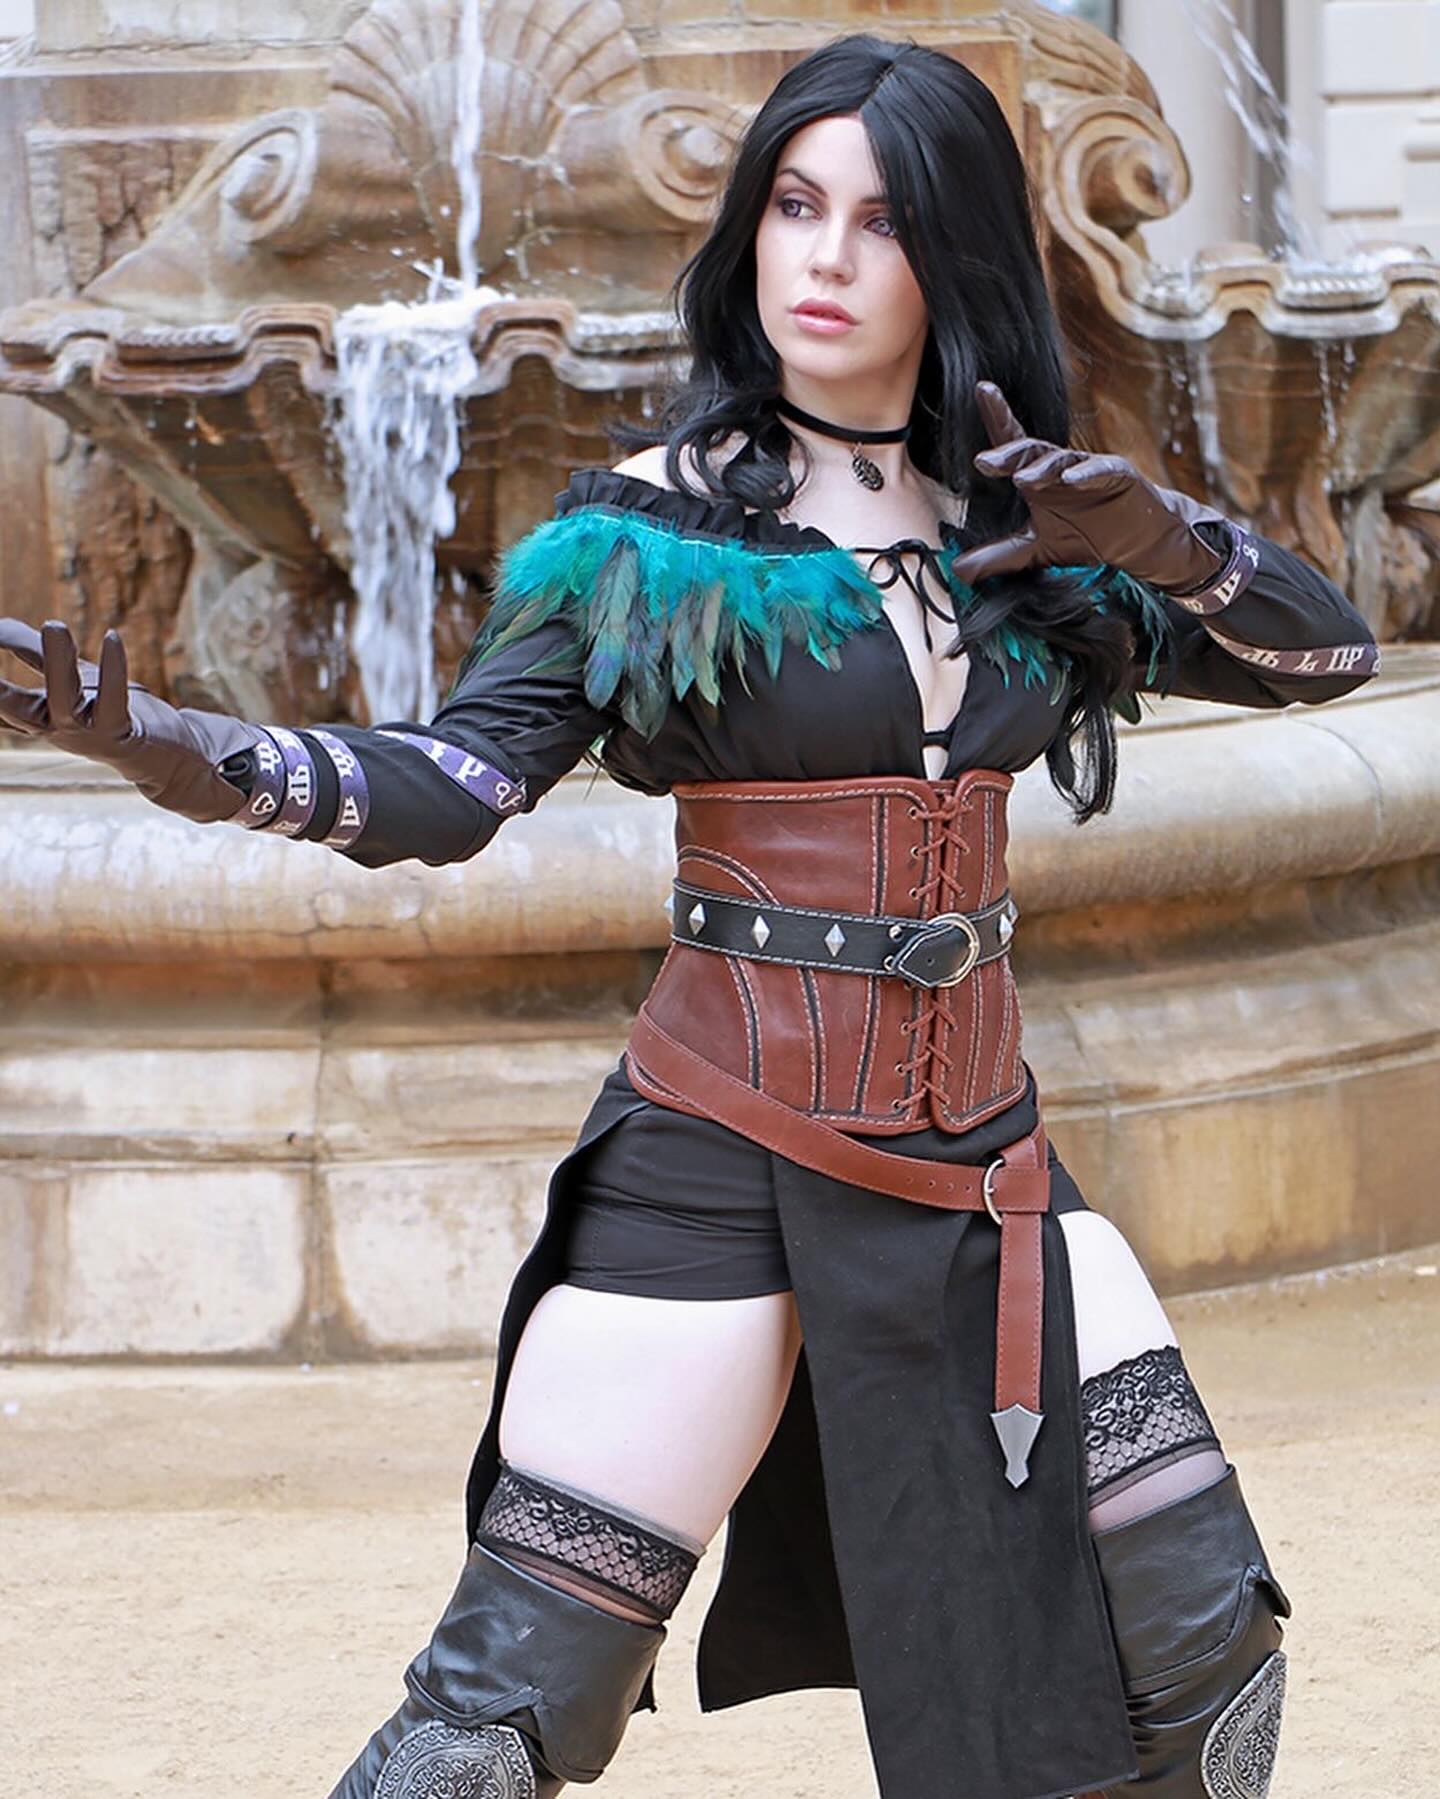 I’m probably going to wear this to Renfaire, I’m not going to lie. There are not enough opportunities to wear some of my best cosplays in public. #yennefer #alternativeoutfit #witcher #wildhunt #yenneferofvengerberg #witcher3